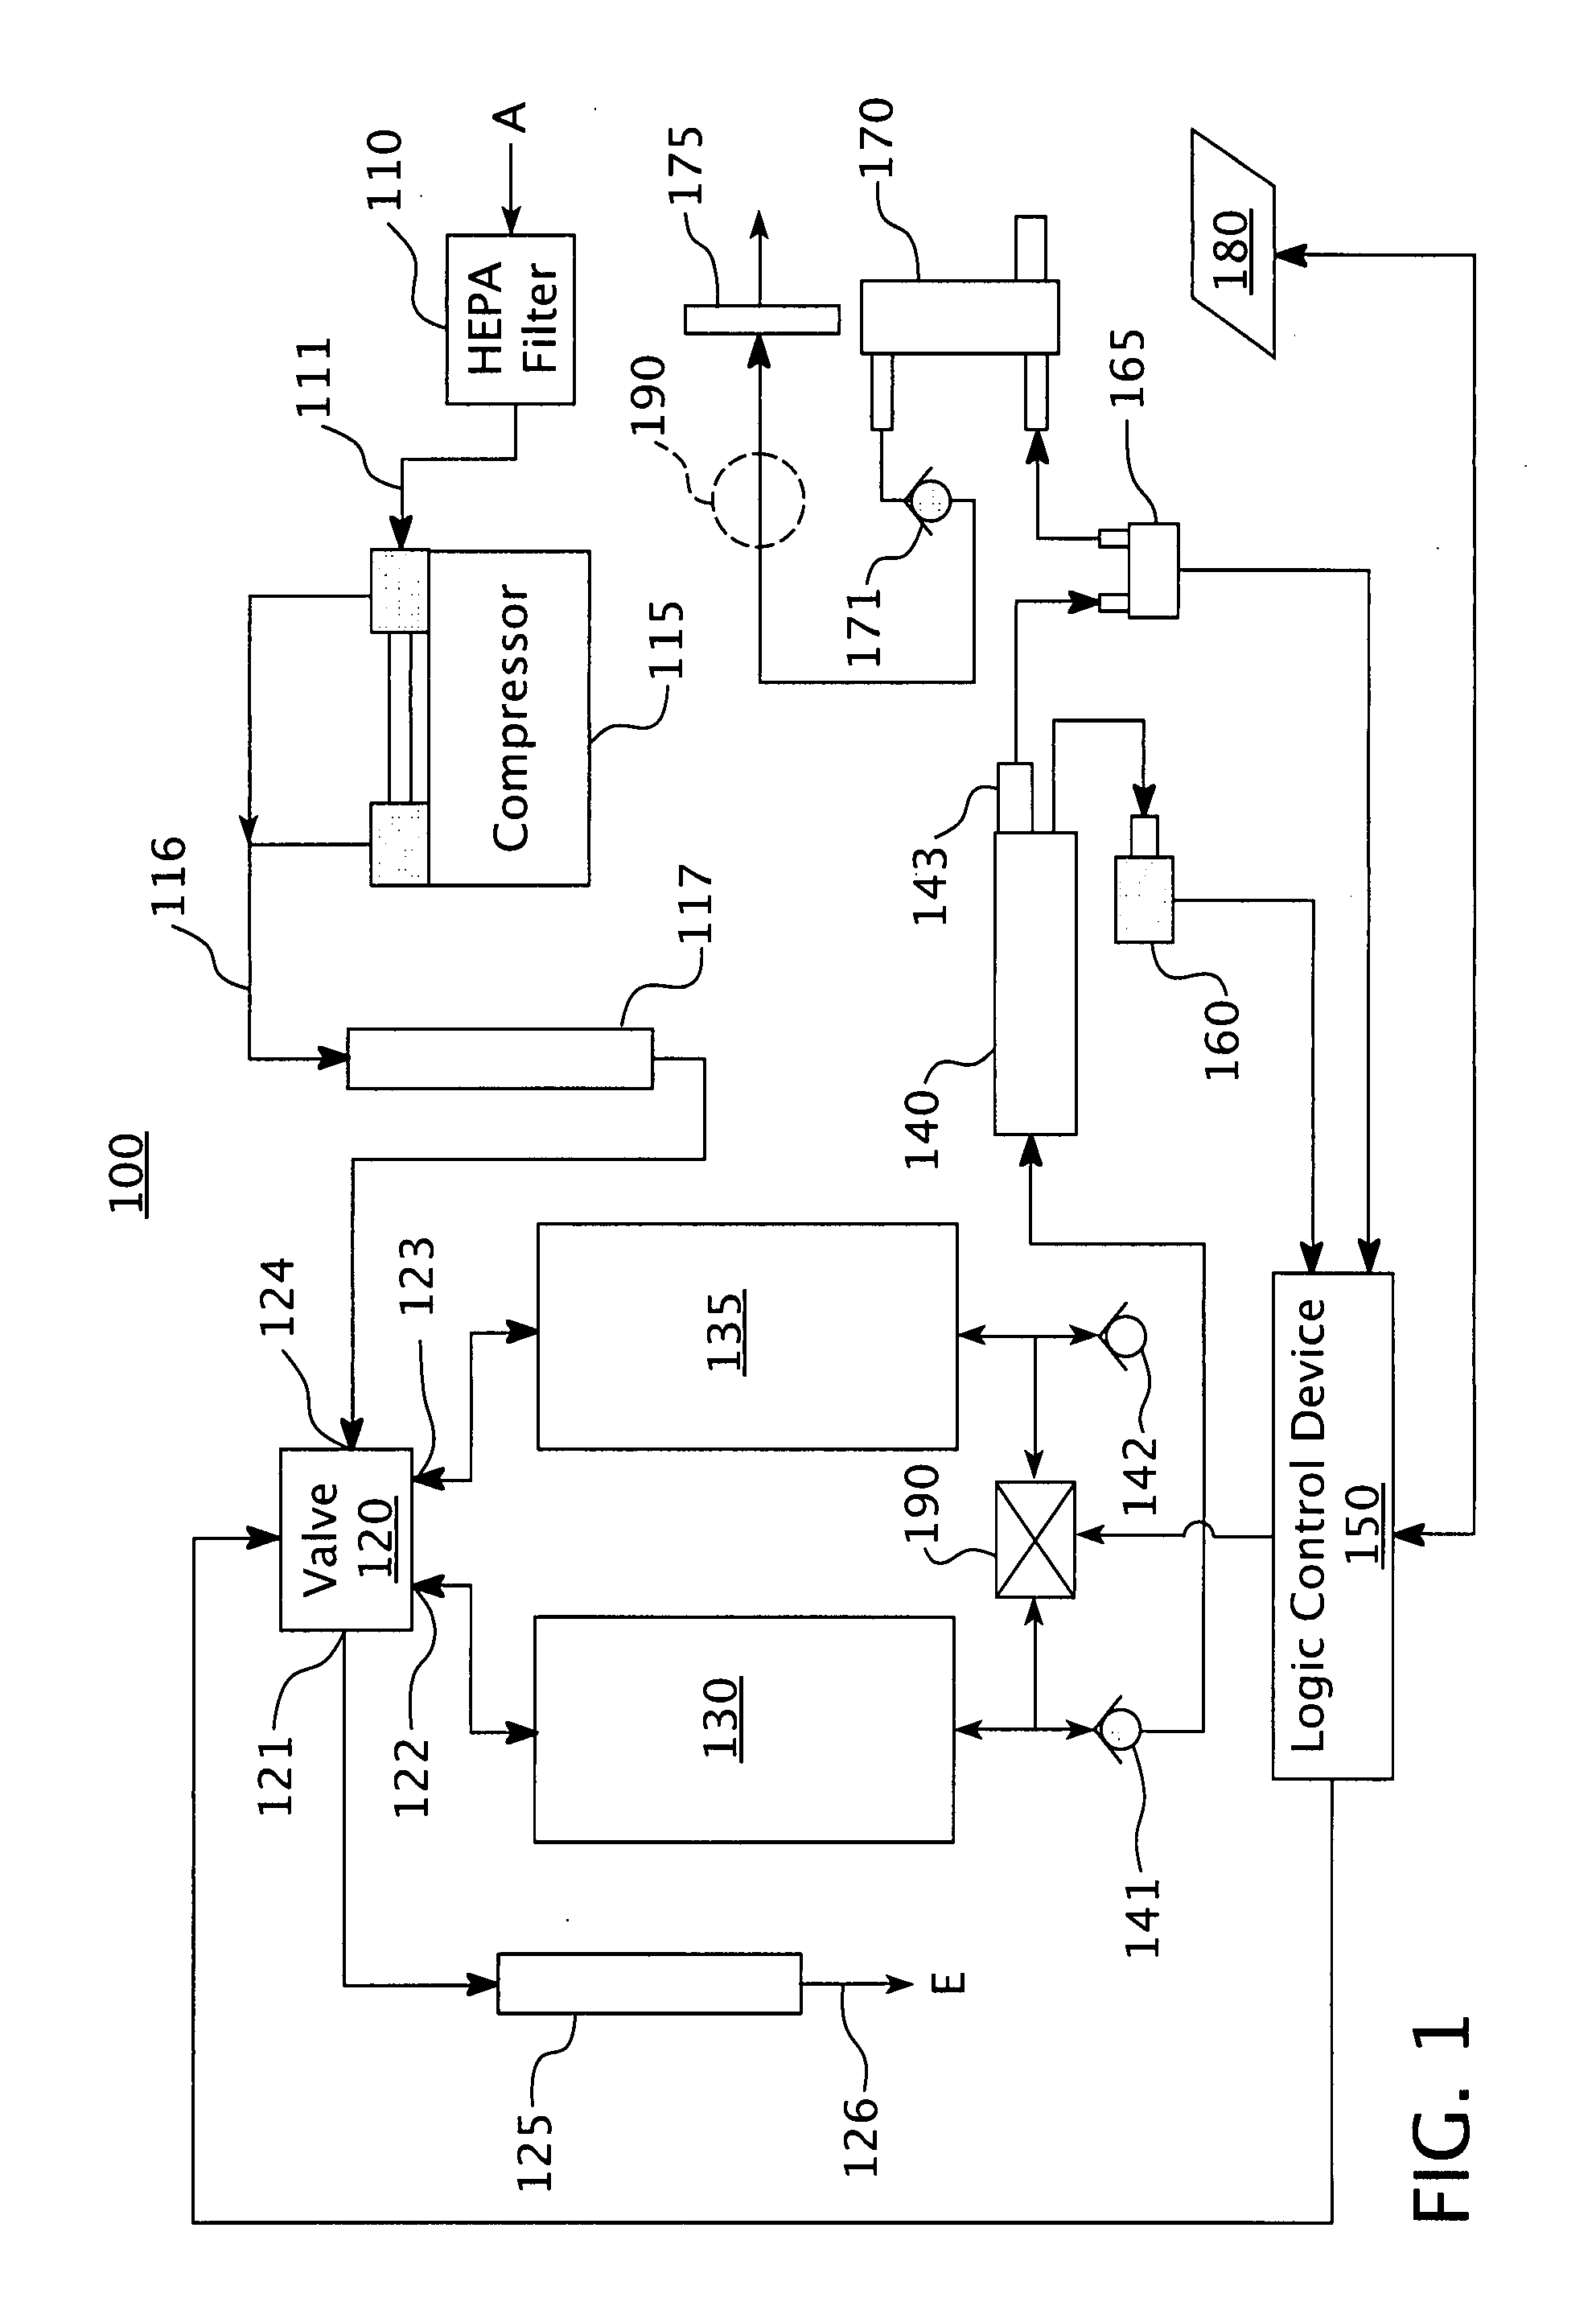 Oxygen concentration system and method